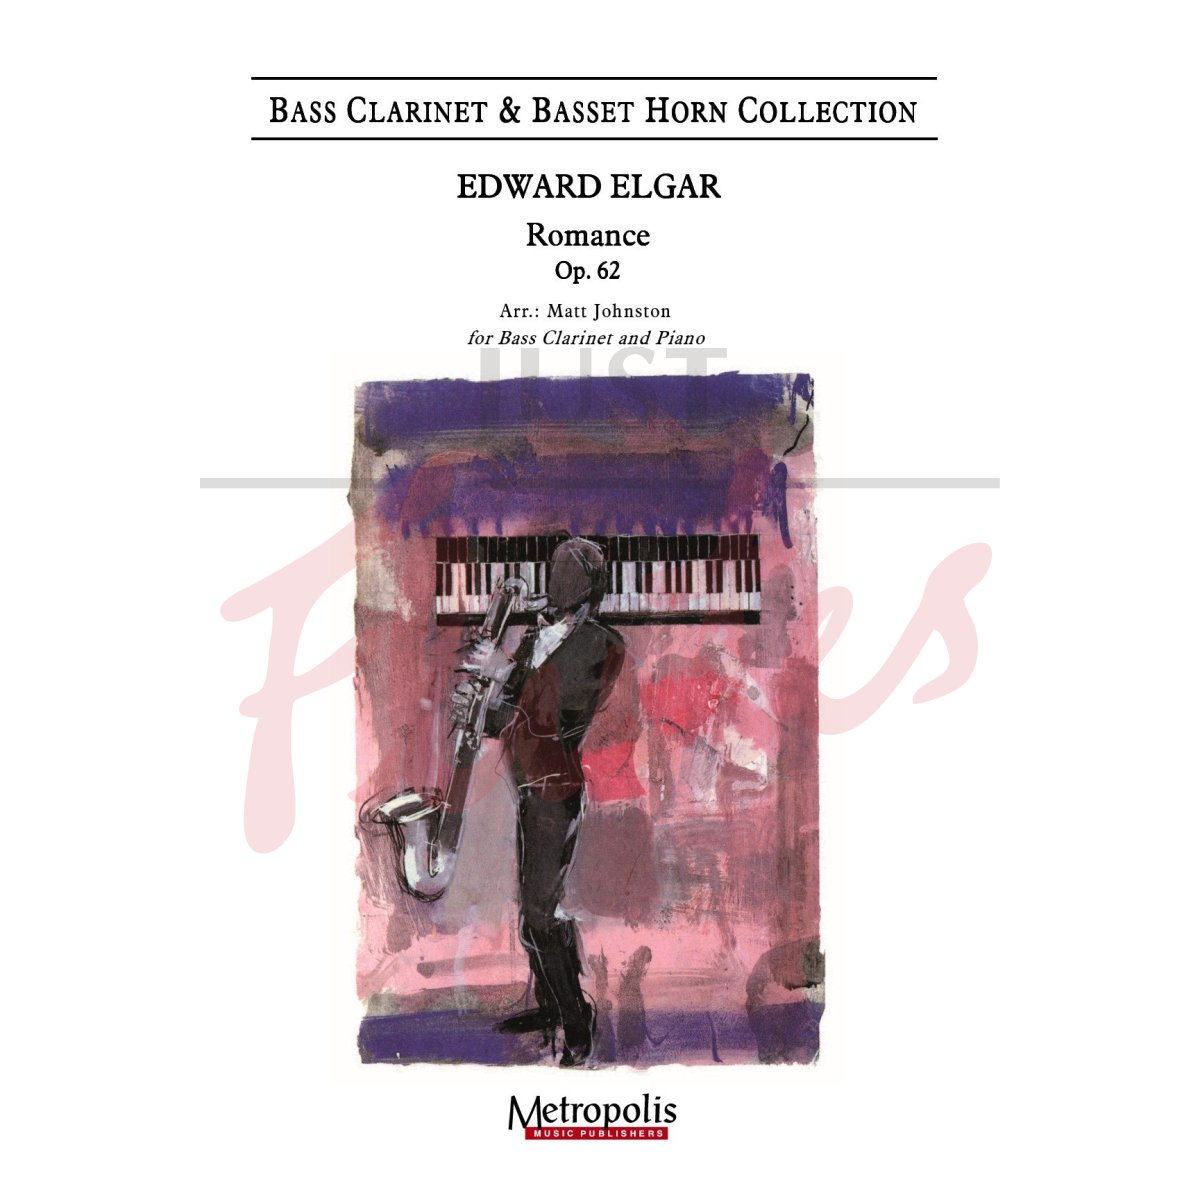 Romance for Bass Clarinet and Piano